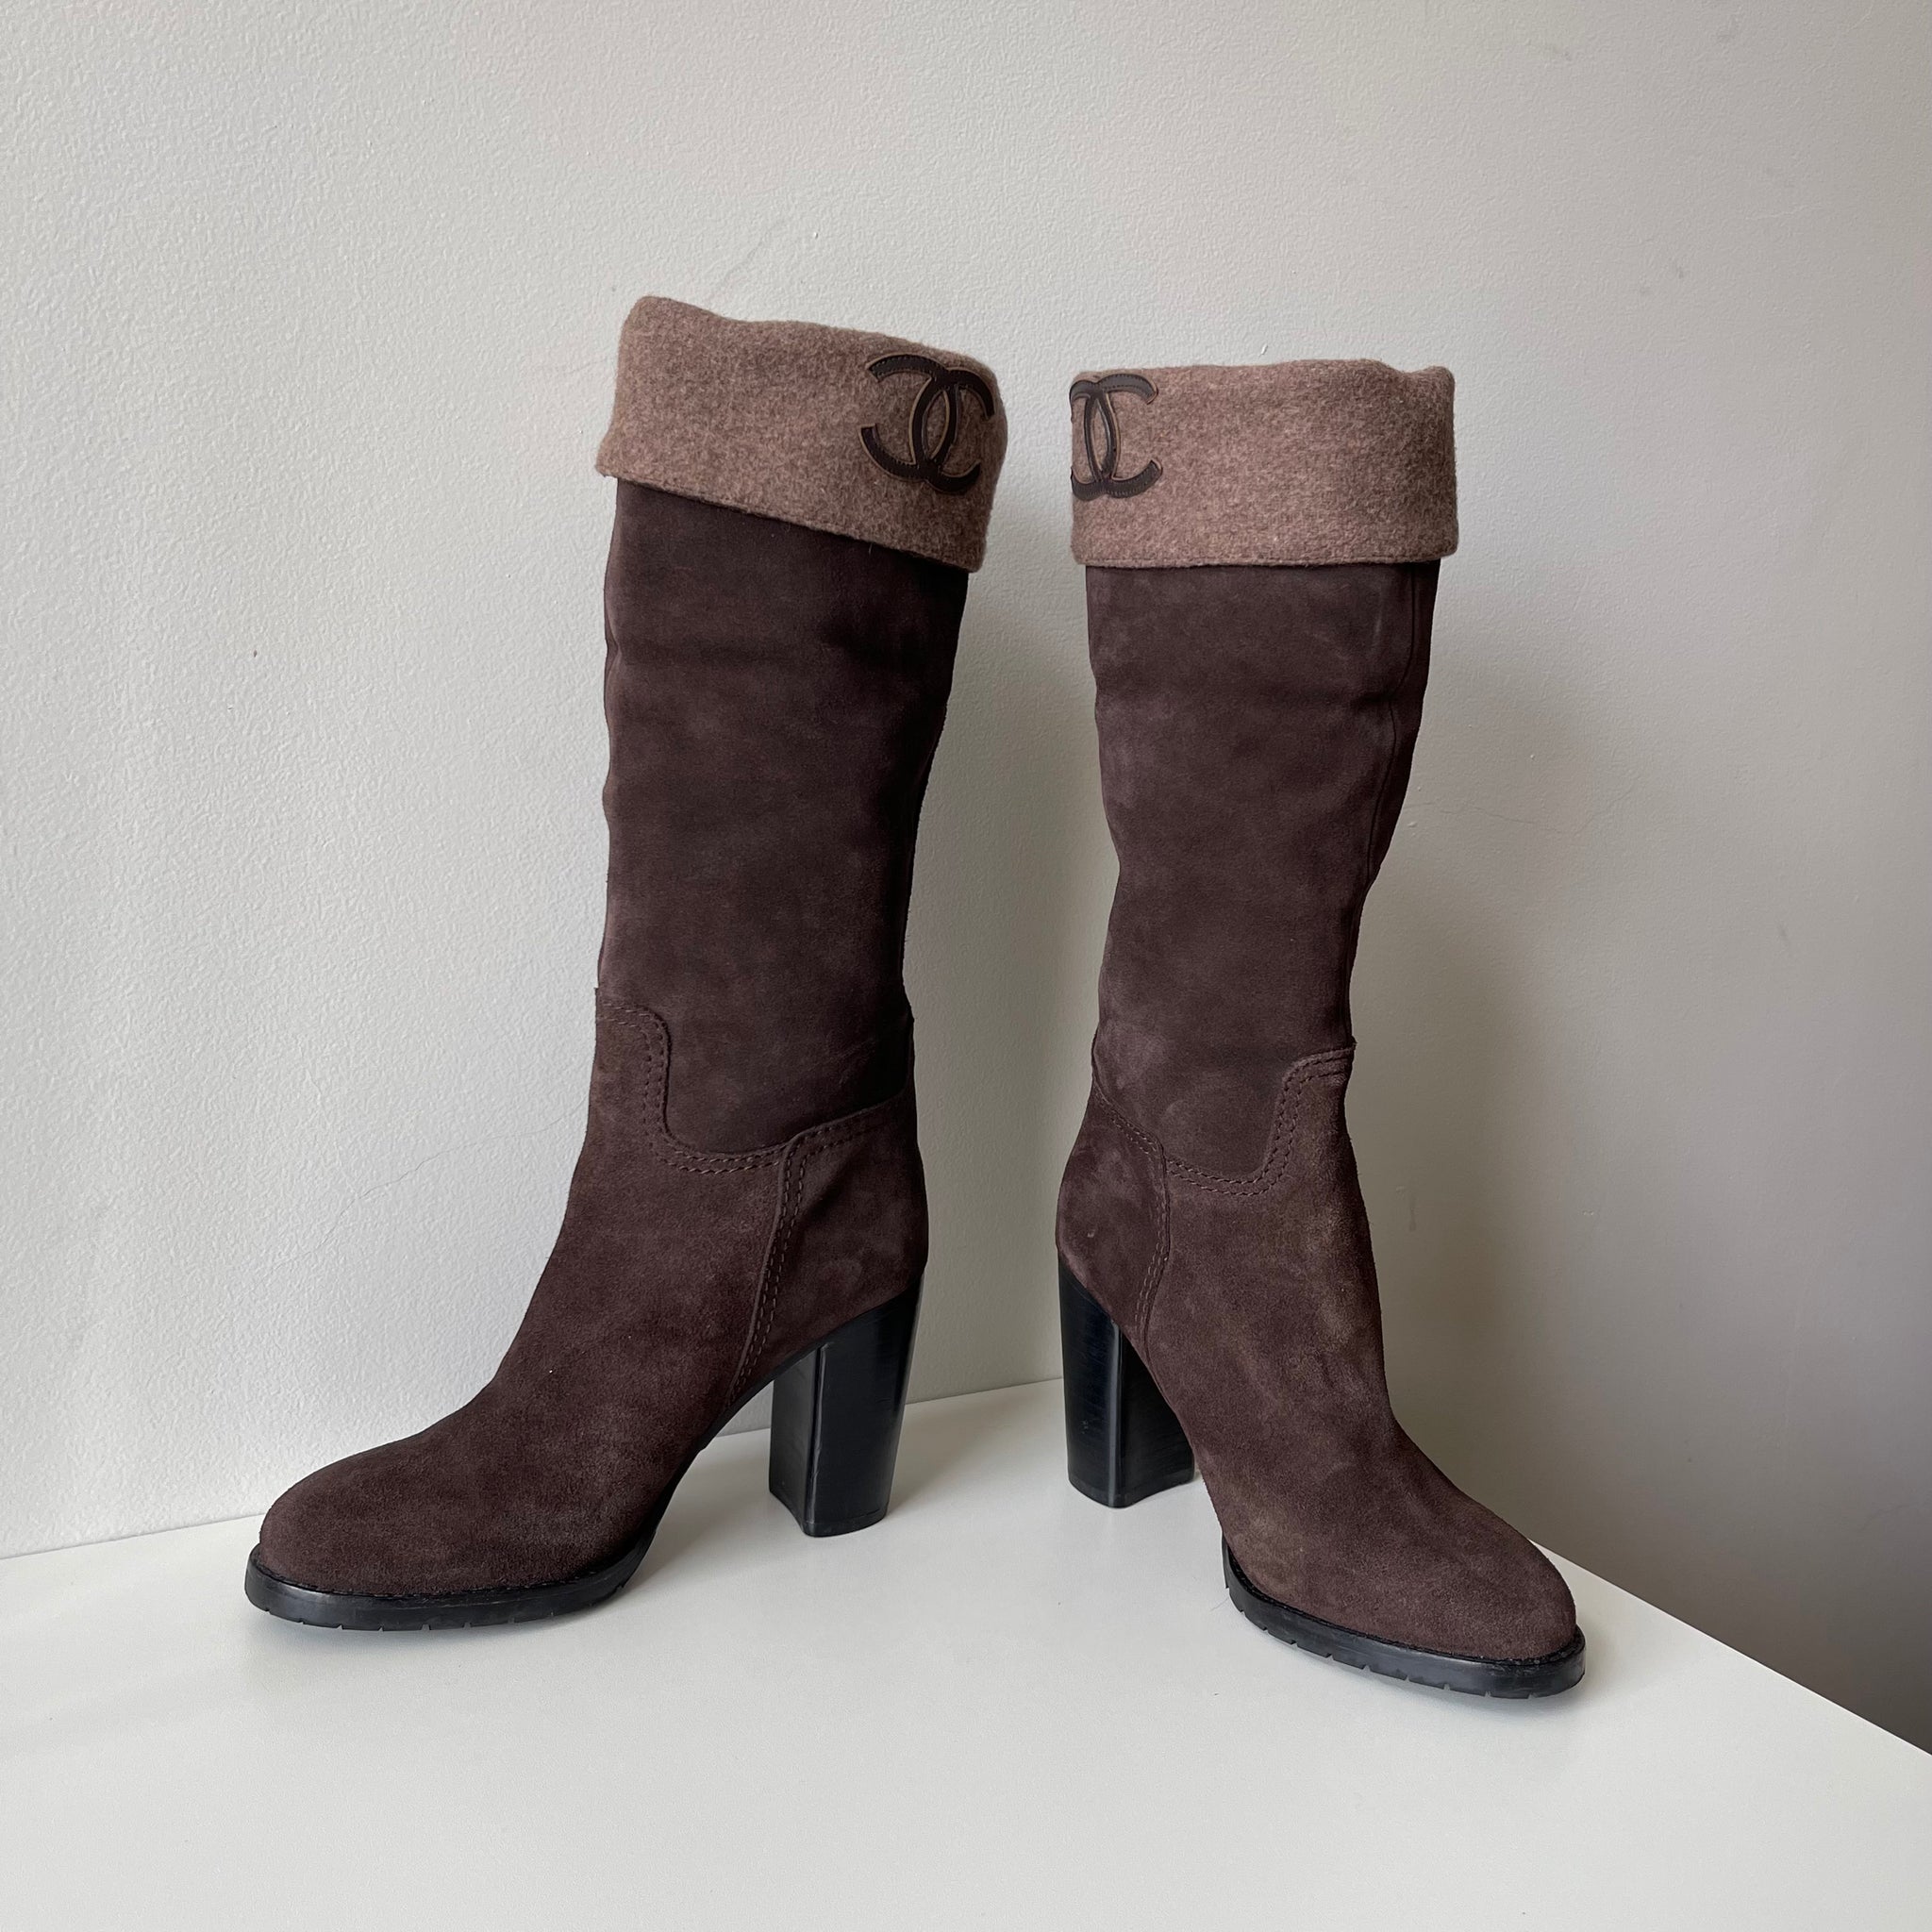 Chanel Suede Boots